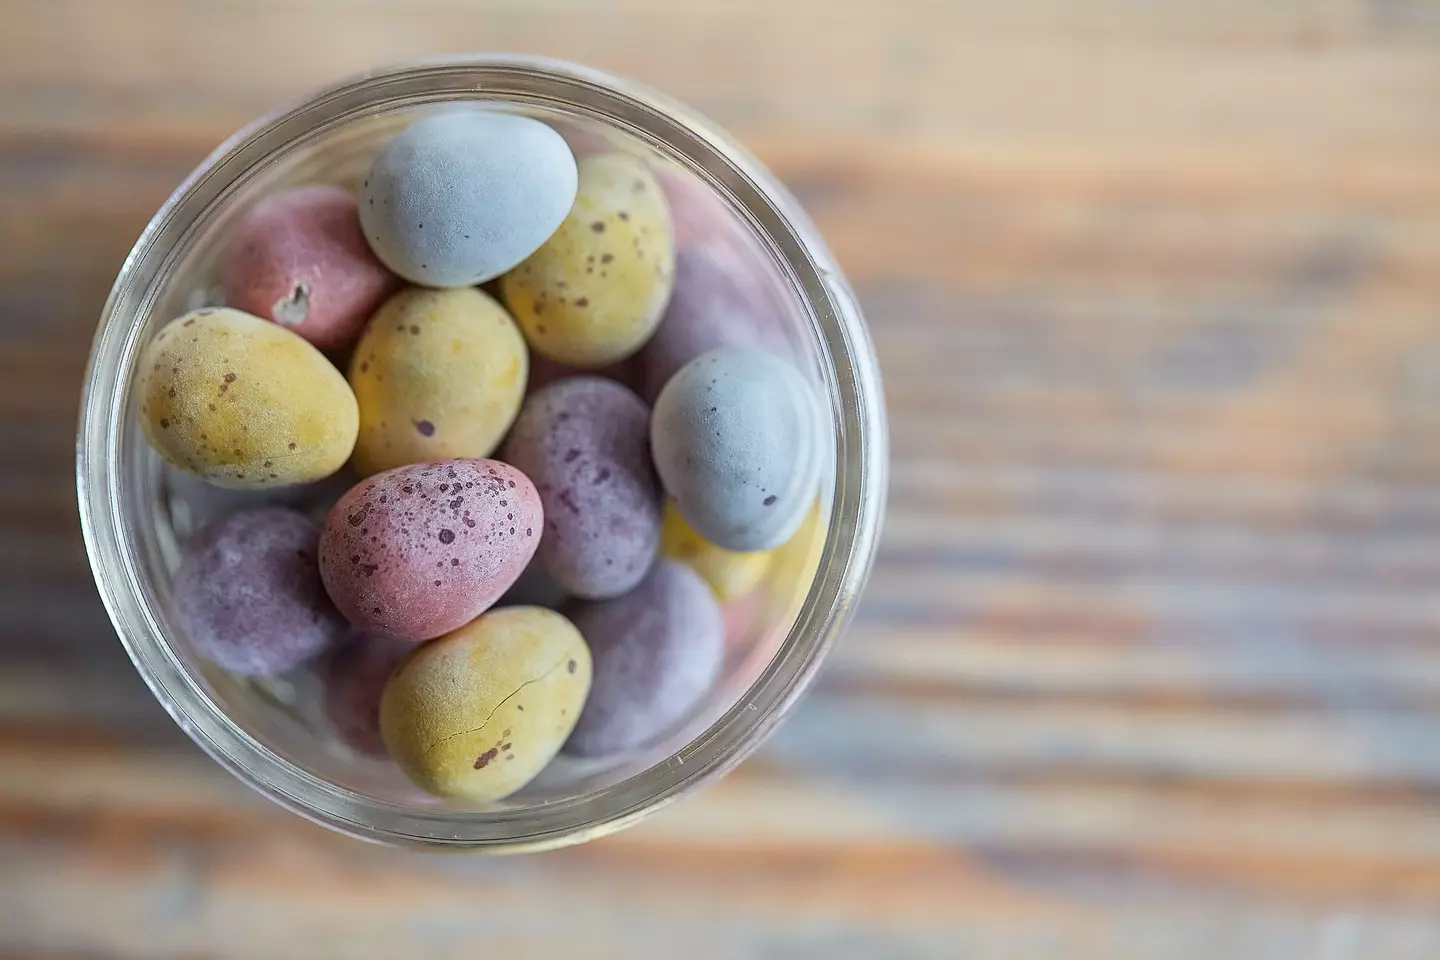 Mini Eggs shouldn't be eaten by children under the age of four.